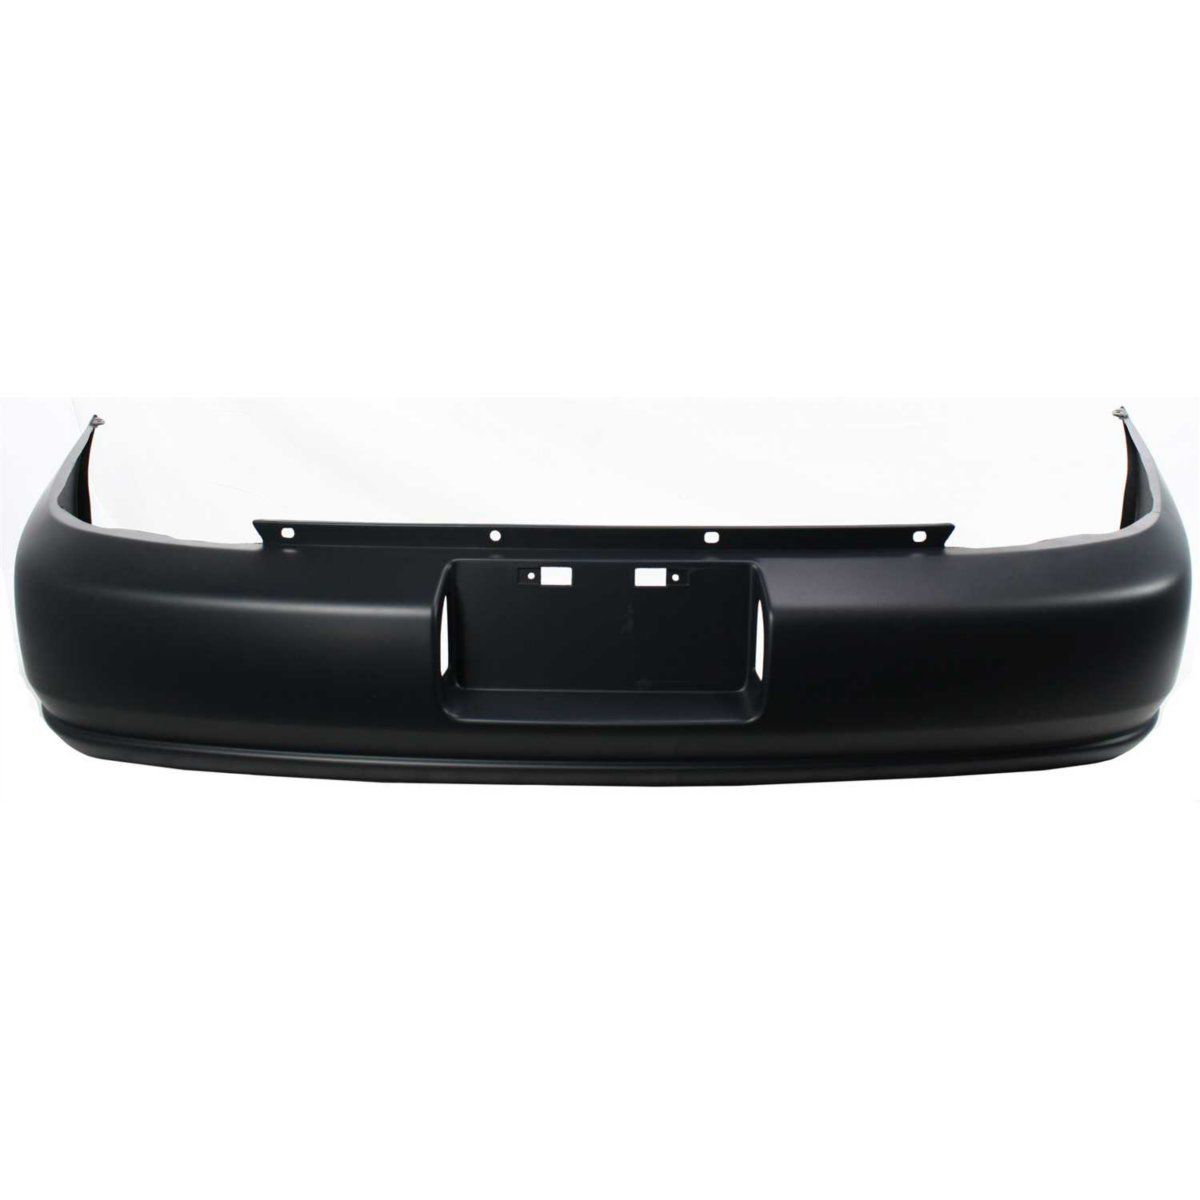 1998-1999 NISSAN ALTIMA Rear Bumper Cover Painted to Match